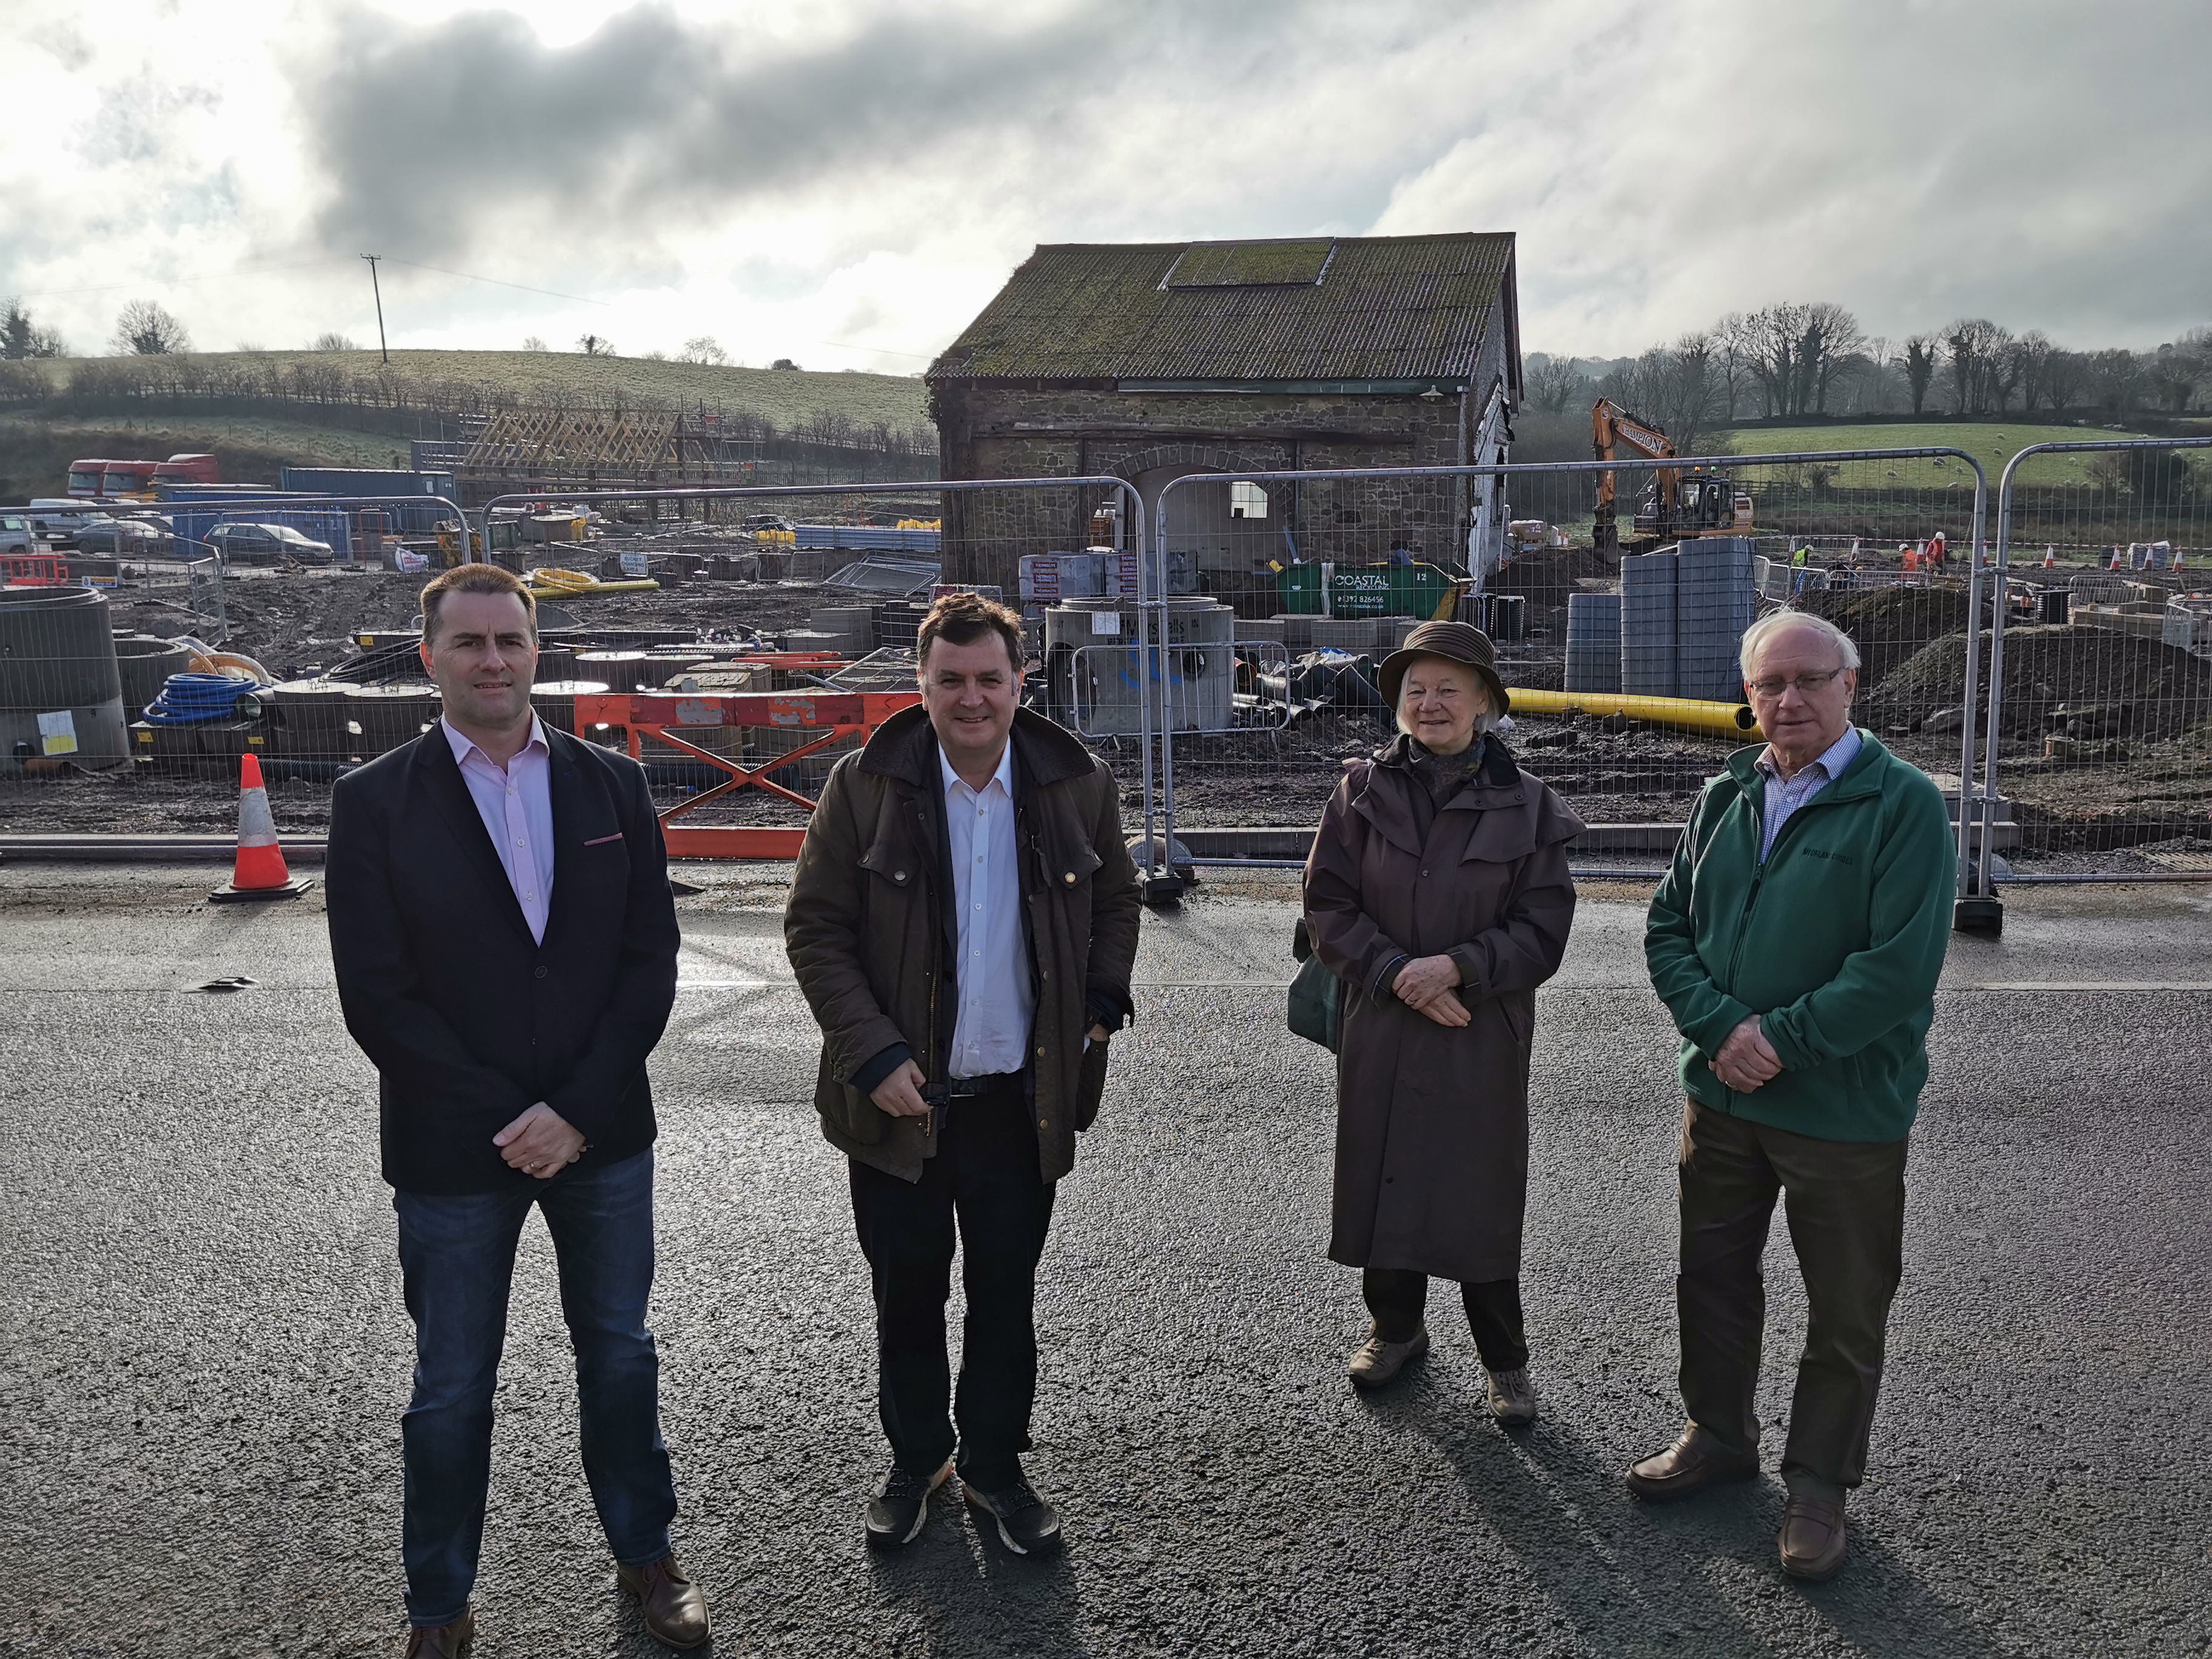 NEW HOMES IN MORETONHAMPSTEAD A ‘GREAT EXAMPLE’ OF BROWNFIELD SITE USE SAYS MP